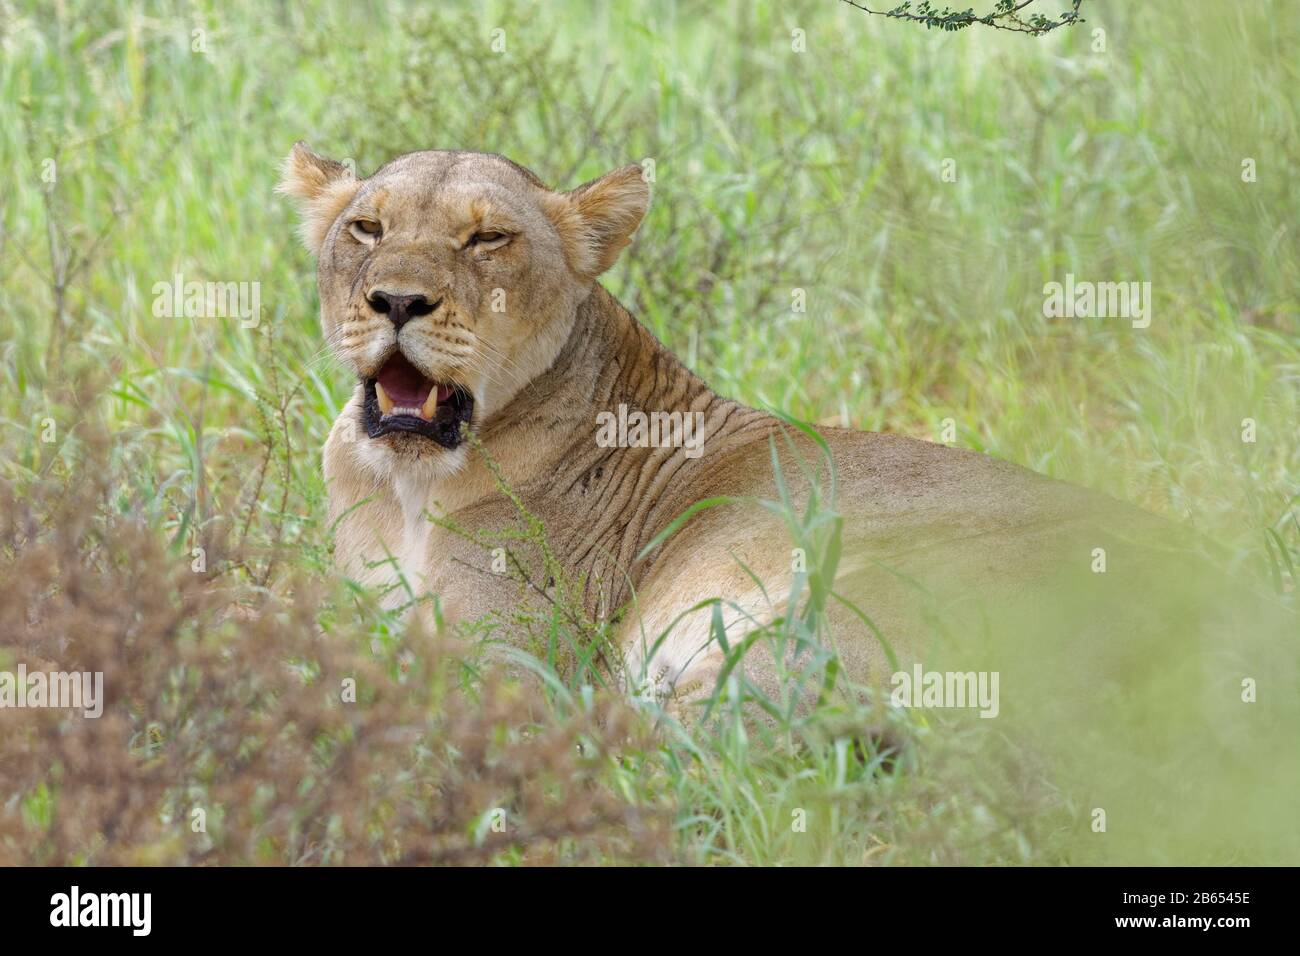 Lioness (Panthera leo), yawning adult female, lying in the green grass, Kgalagadi Transfrontier Park, Northern Cape, South Africa, Africa Stock Photo